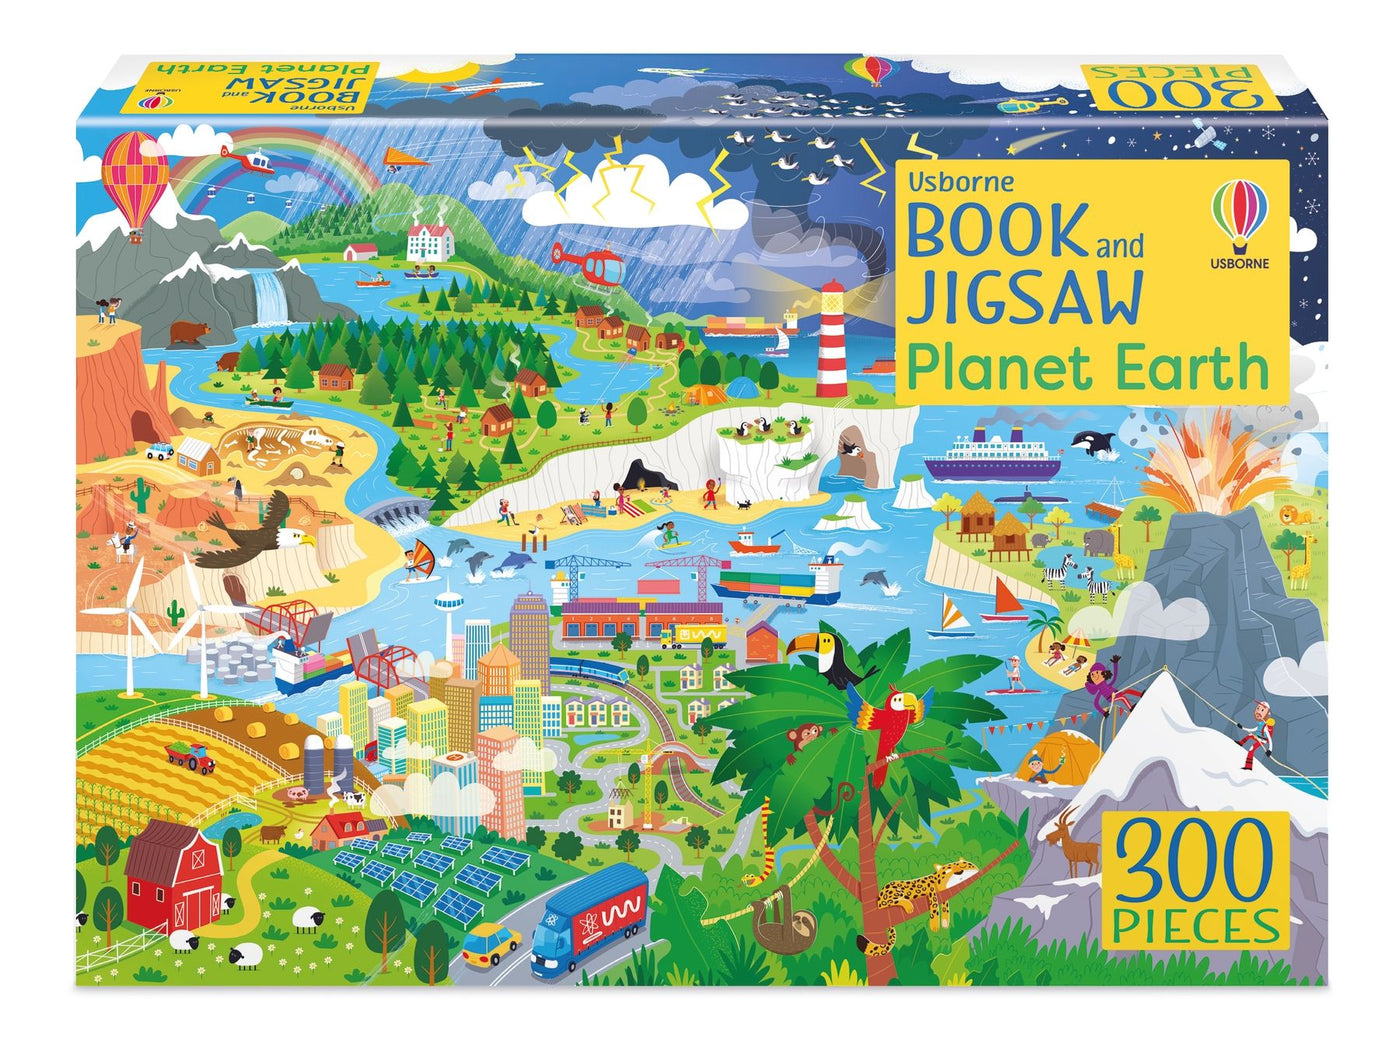 Planet Earth: Book and Jigsaw Puzzle | Usborne Books